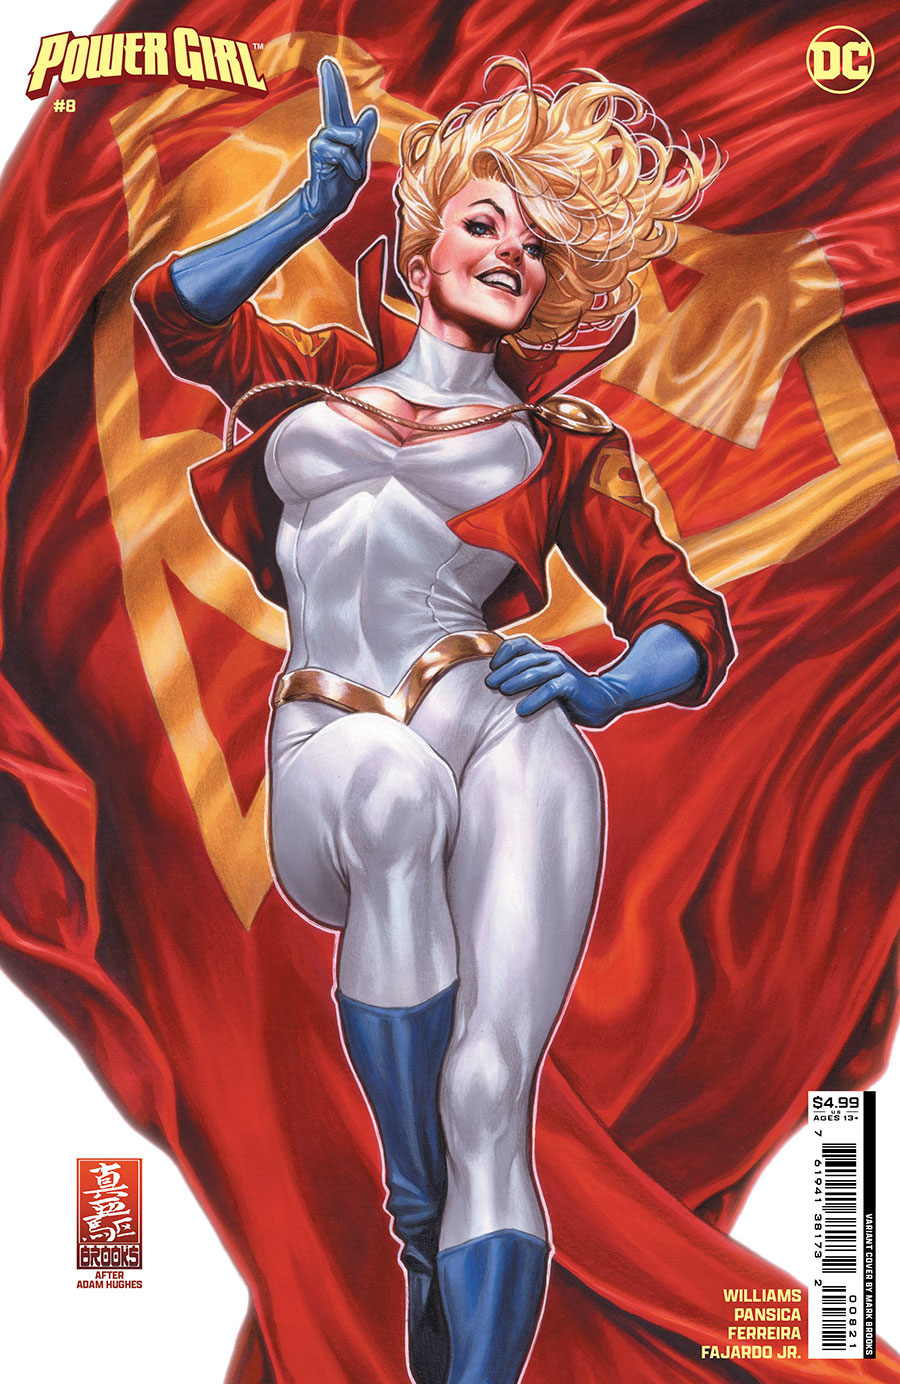 Power Girl Vol 3 #8 Cover B Variant Mark Brooks Card Stock Cover (House Of Brainiac Tie-In)